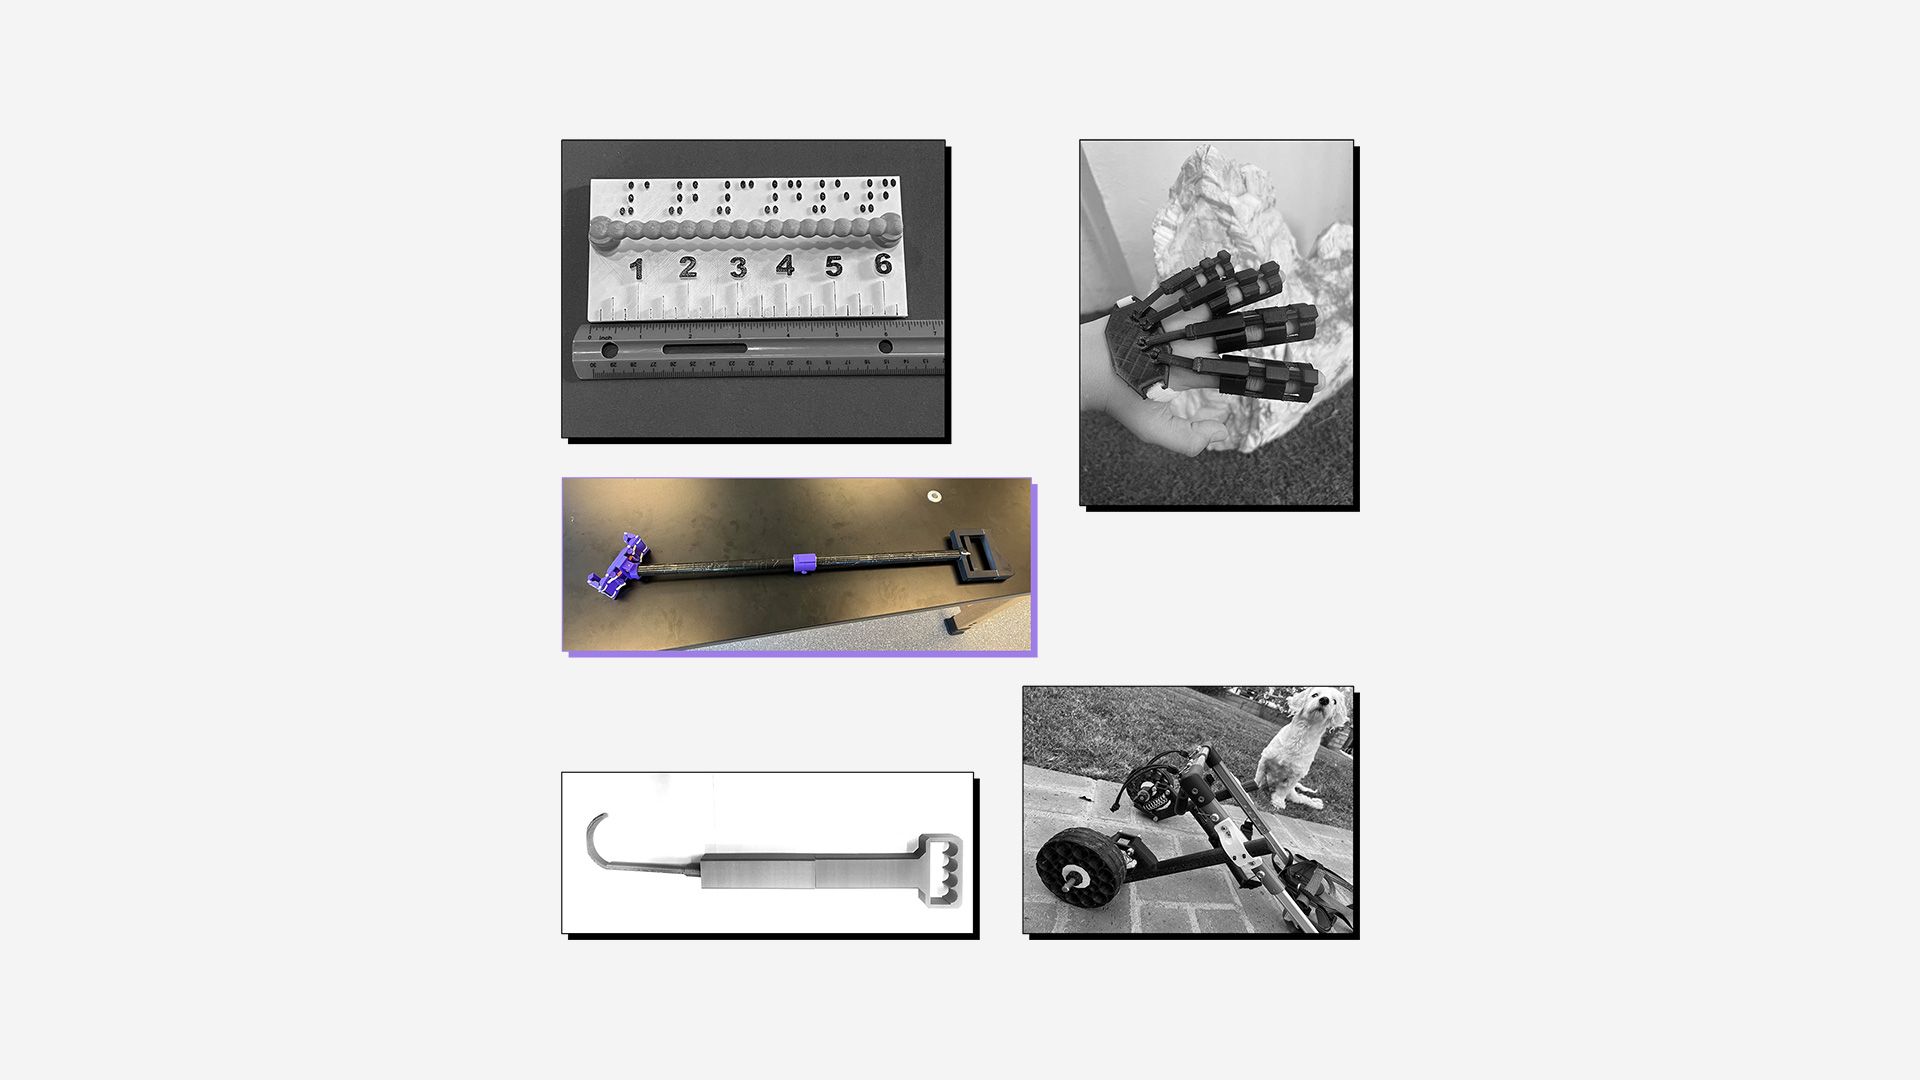 Collage of 3D printed assistive devices with winning entry (grabbing device) highlighted.